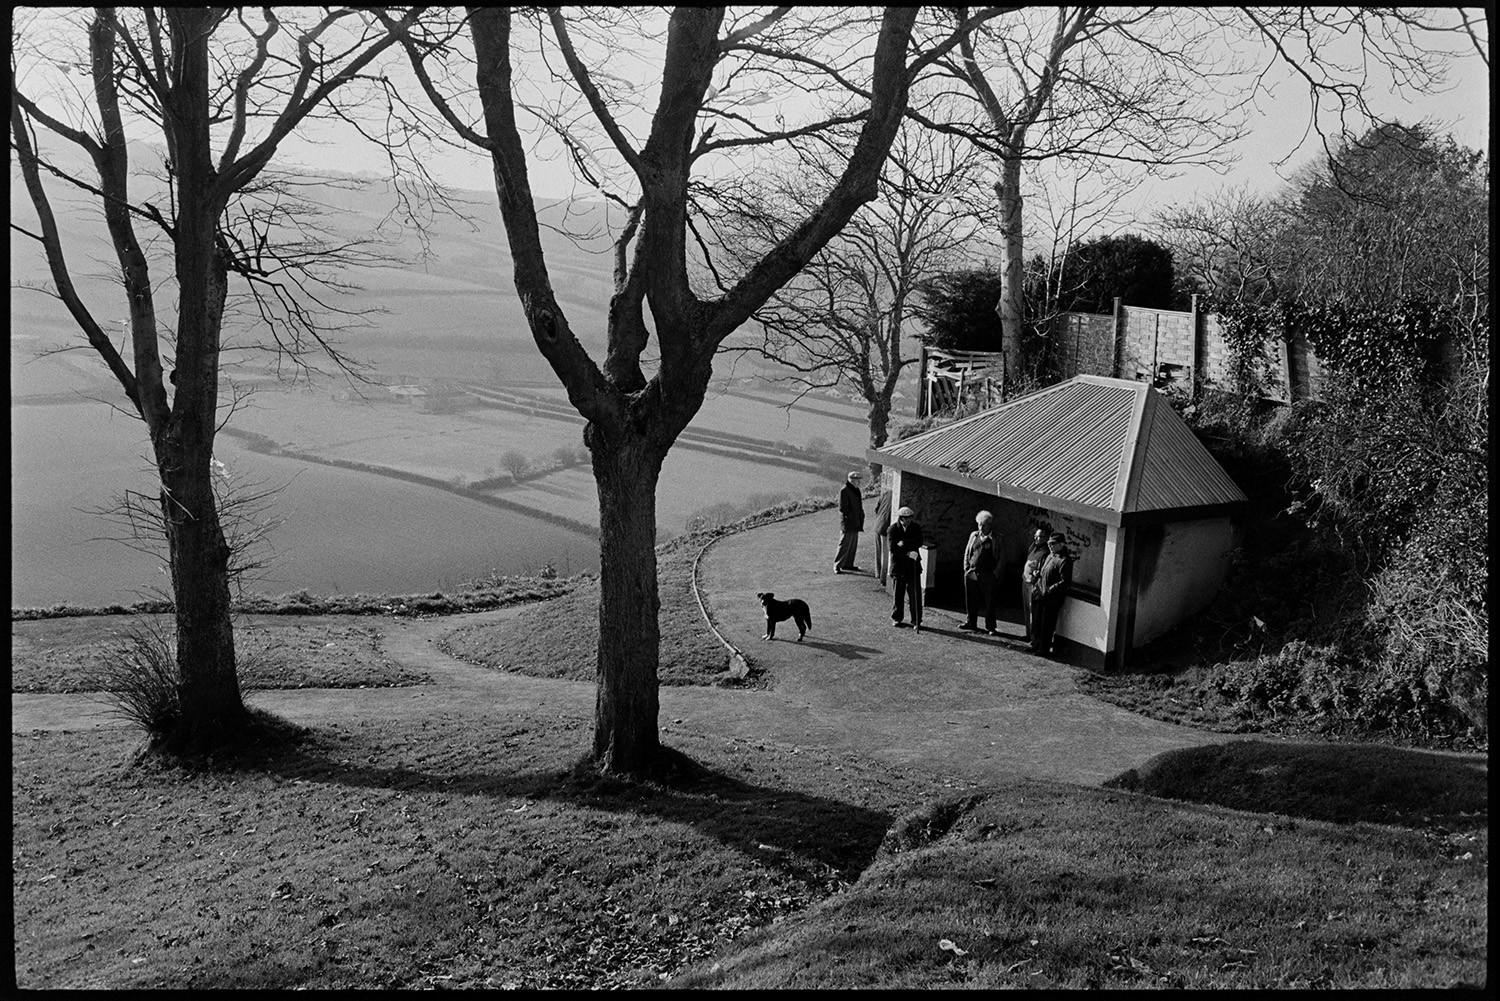 Street scenes with decaying front of antique shop, market.
[People standing chatting at the shelter on Castle Hill, Torrington, with a dog. Fields and hedges can be seen in the background with trees and footpaths in the foreground.]